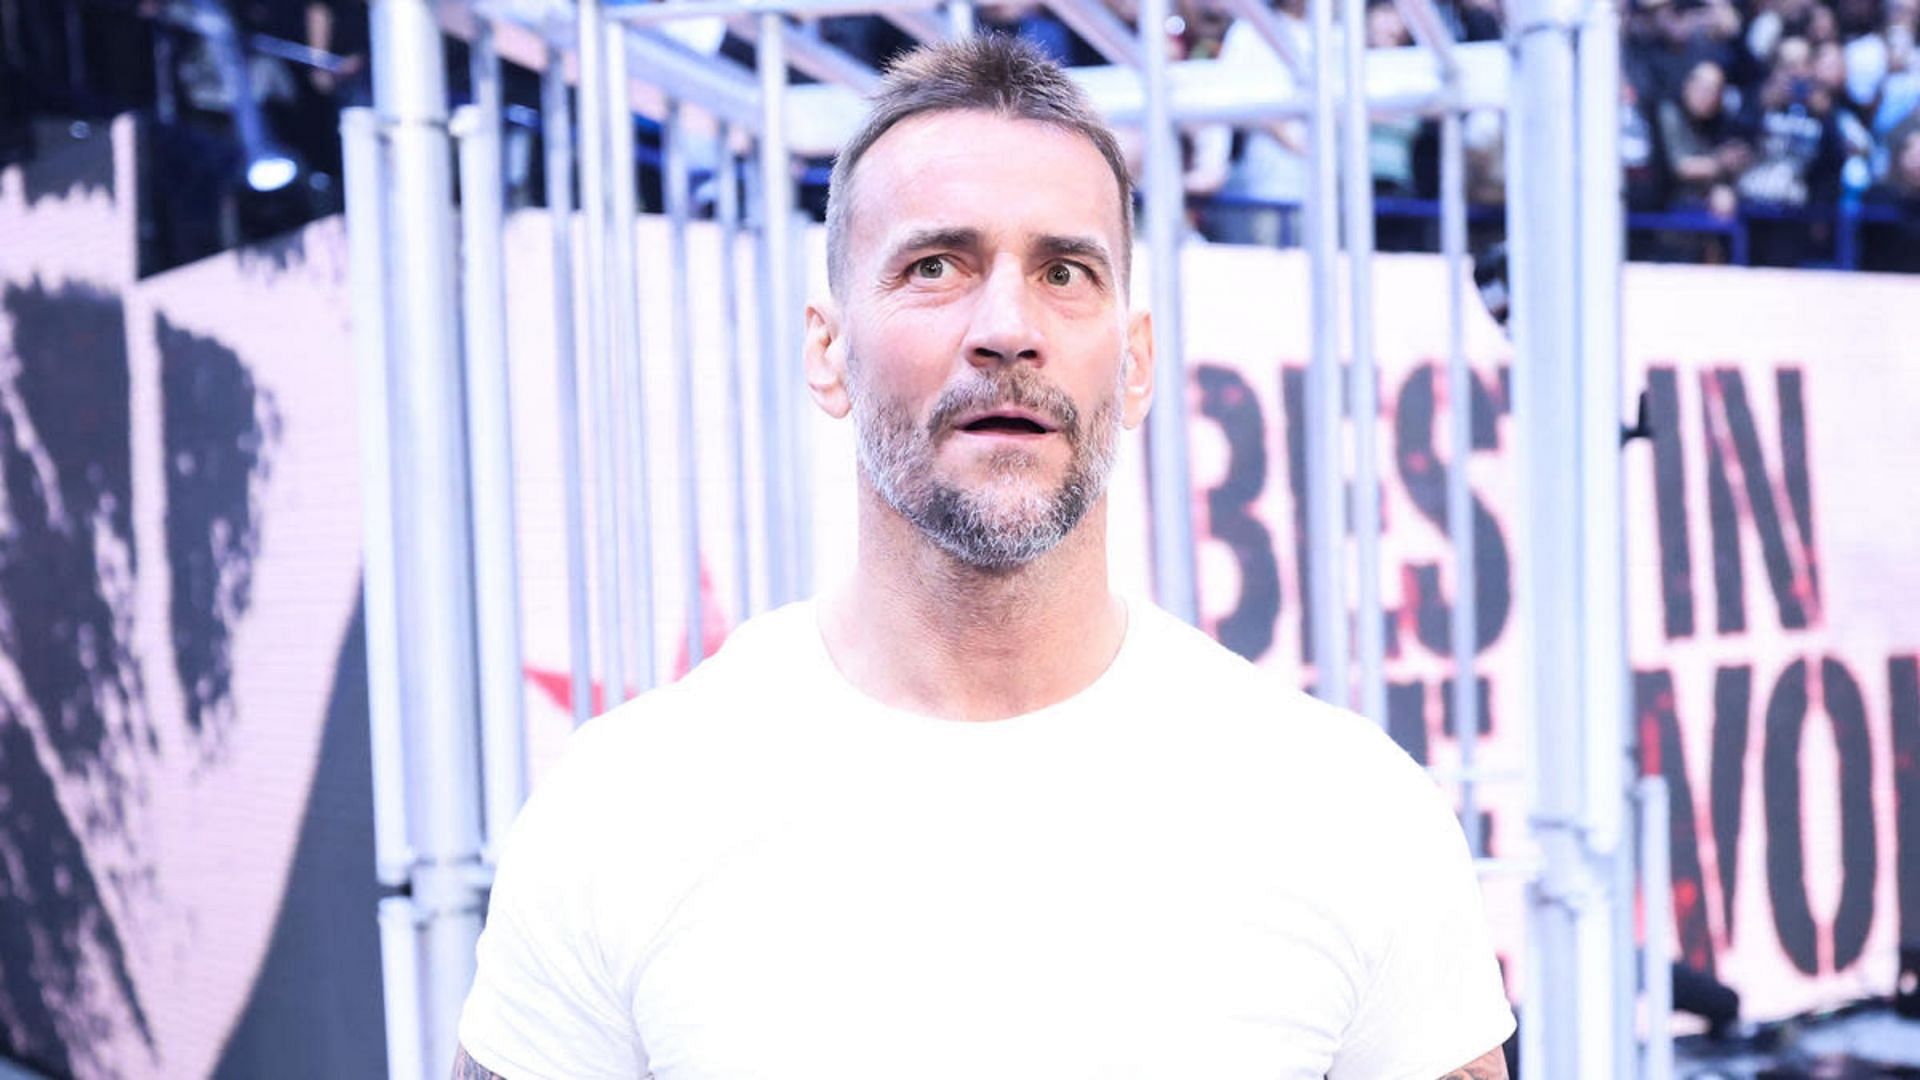 CM Punk will appear on WWE SmackDown next Friday